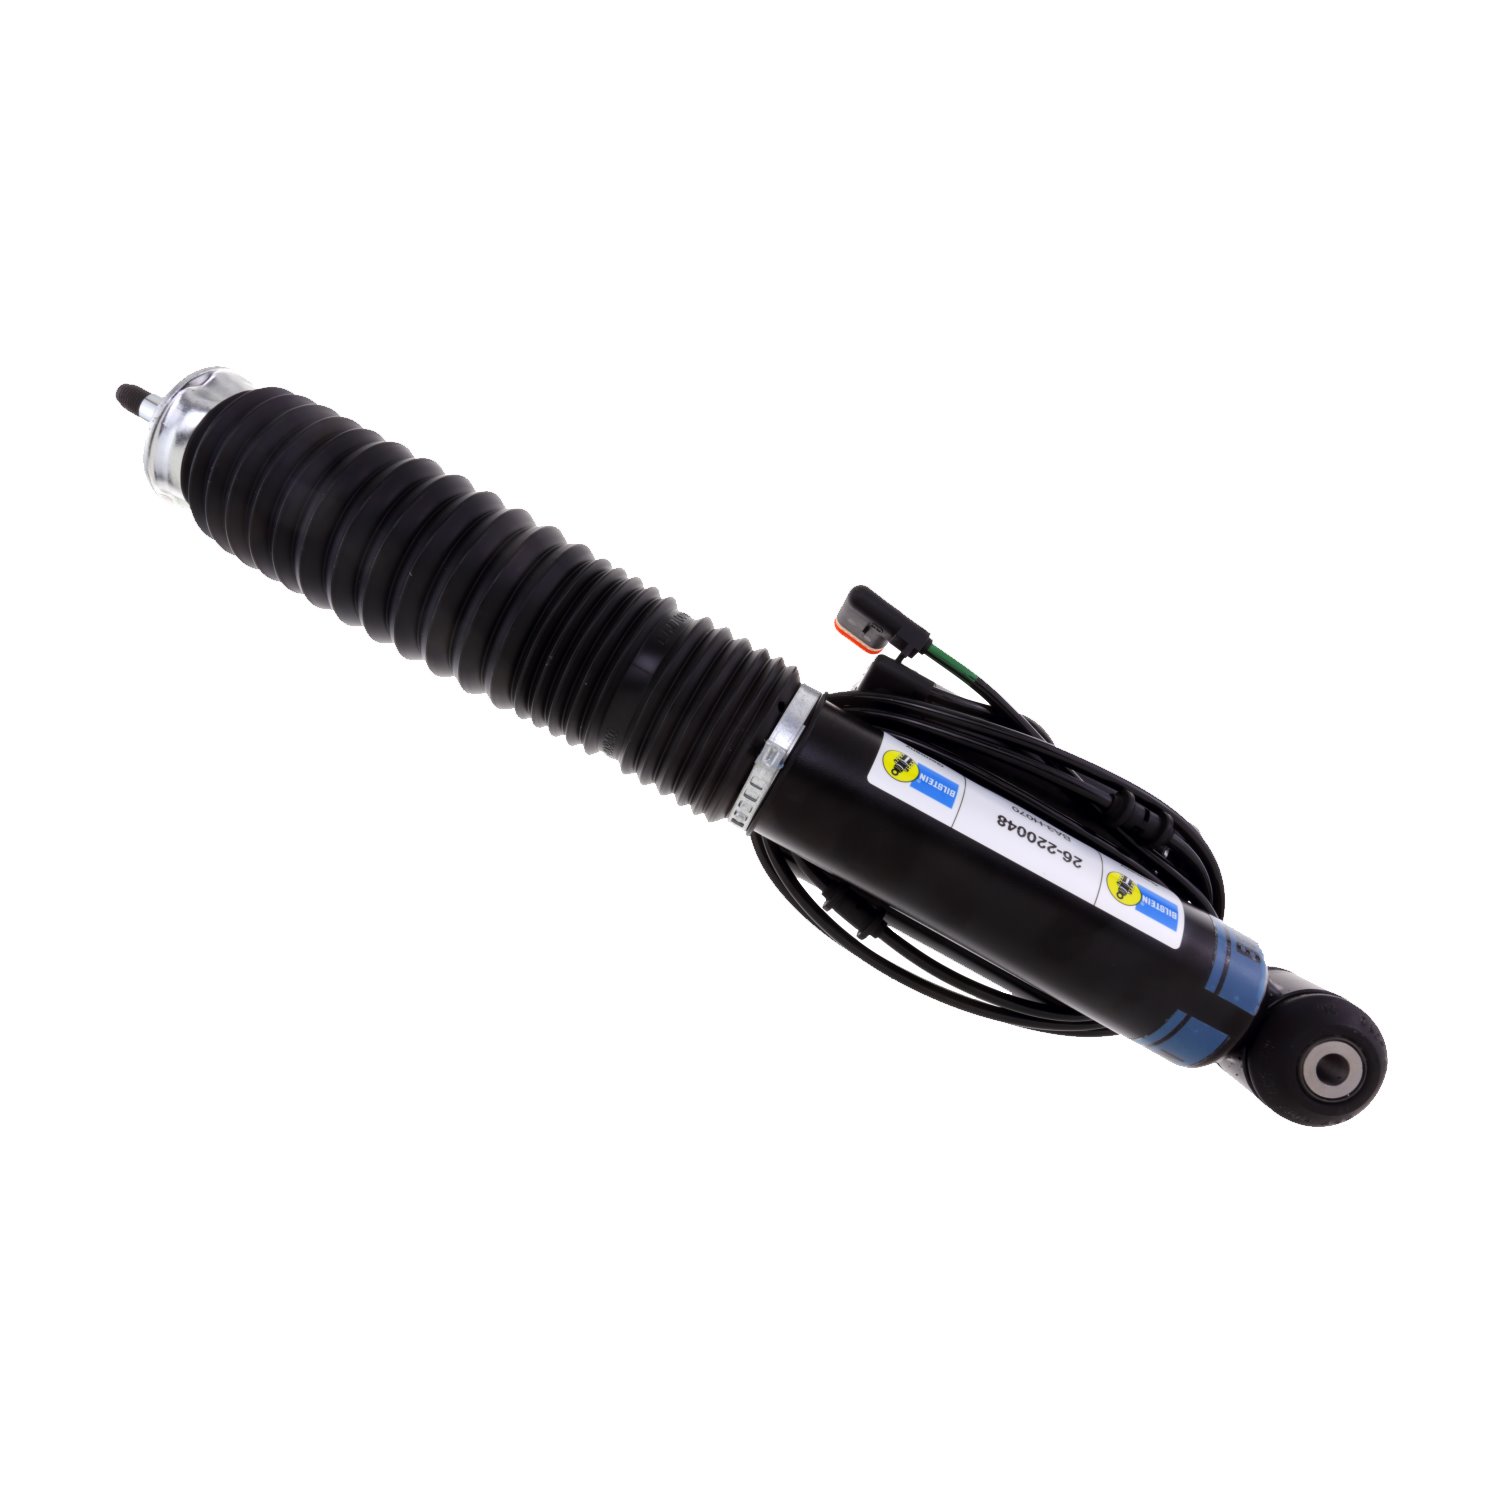 B4 OE Replacement (Air) - Air Shock Absorber